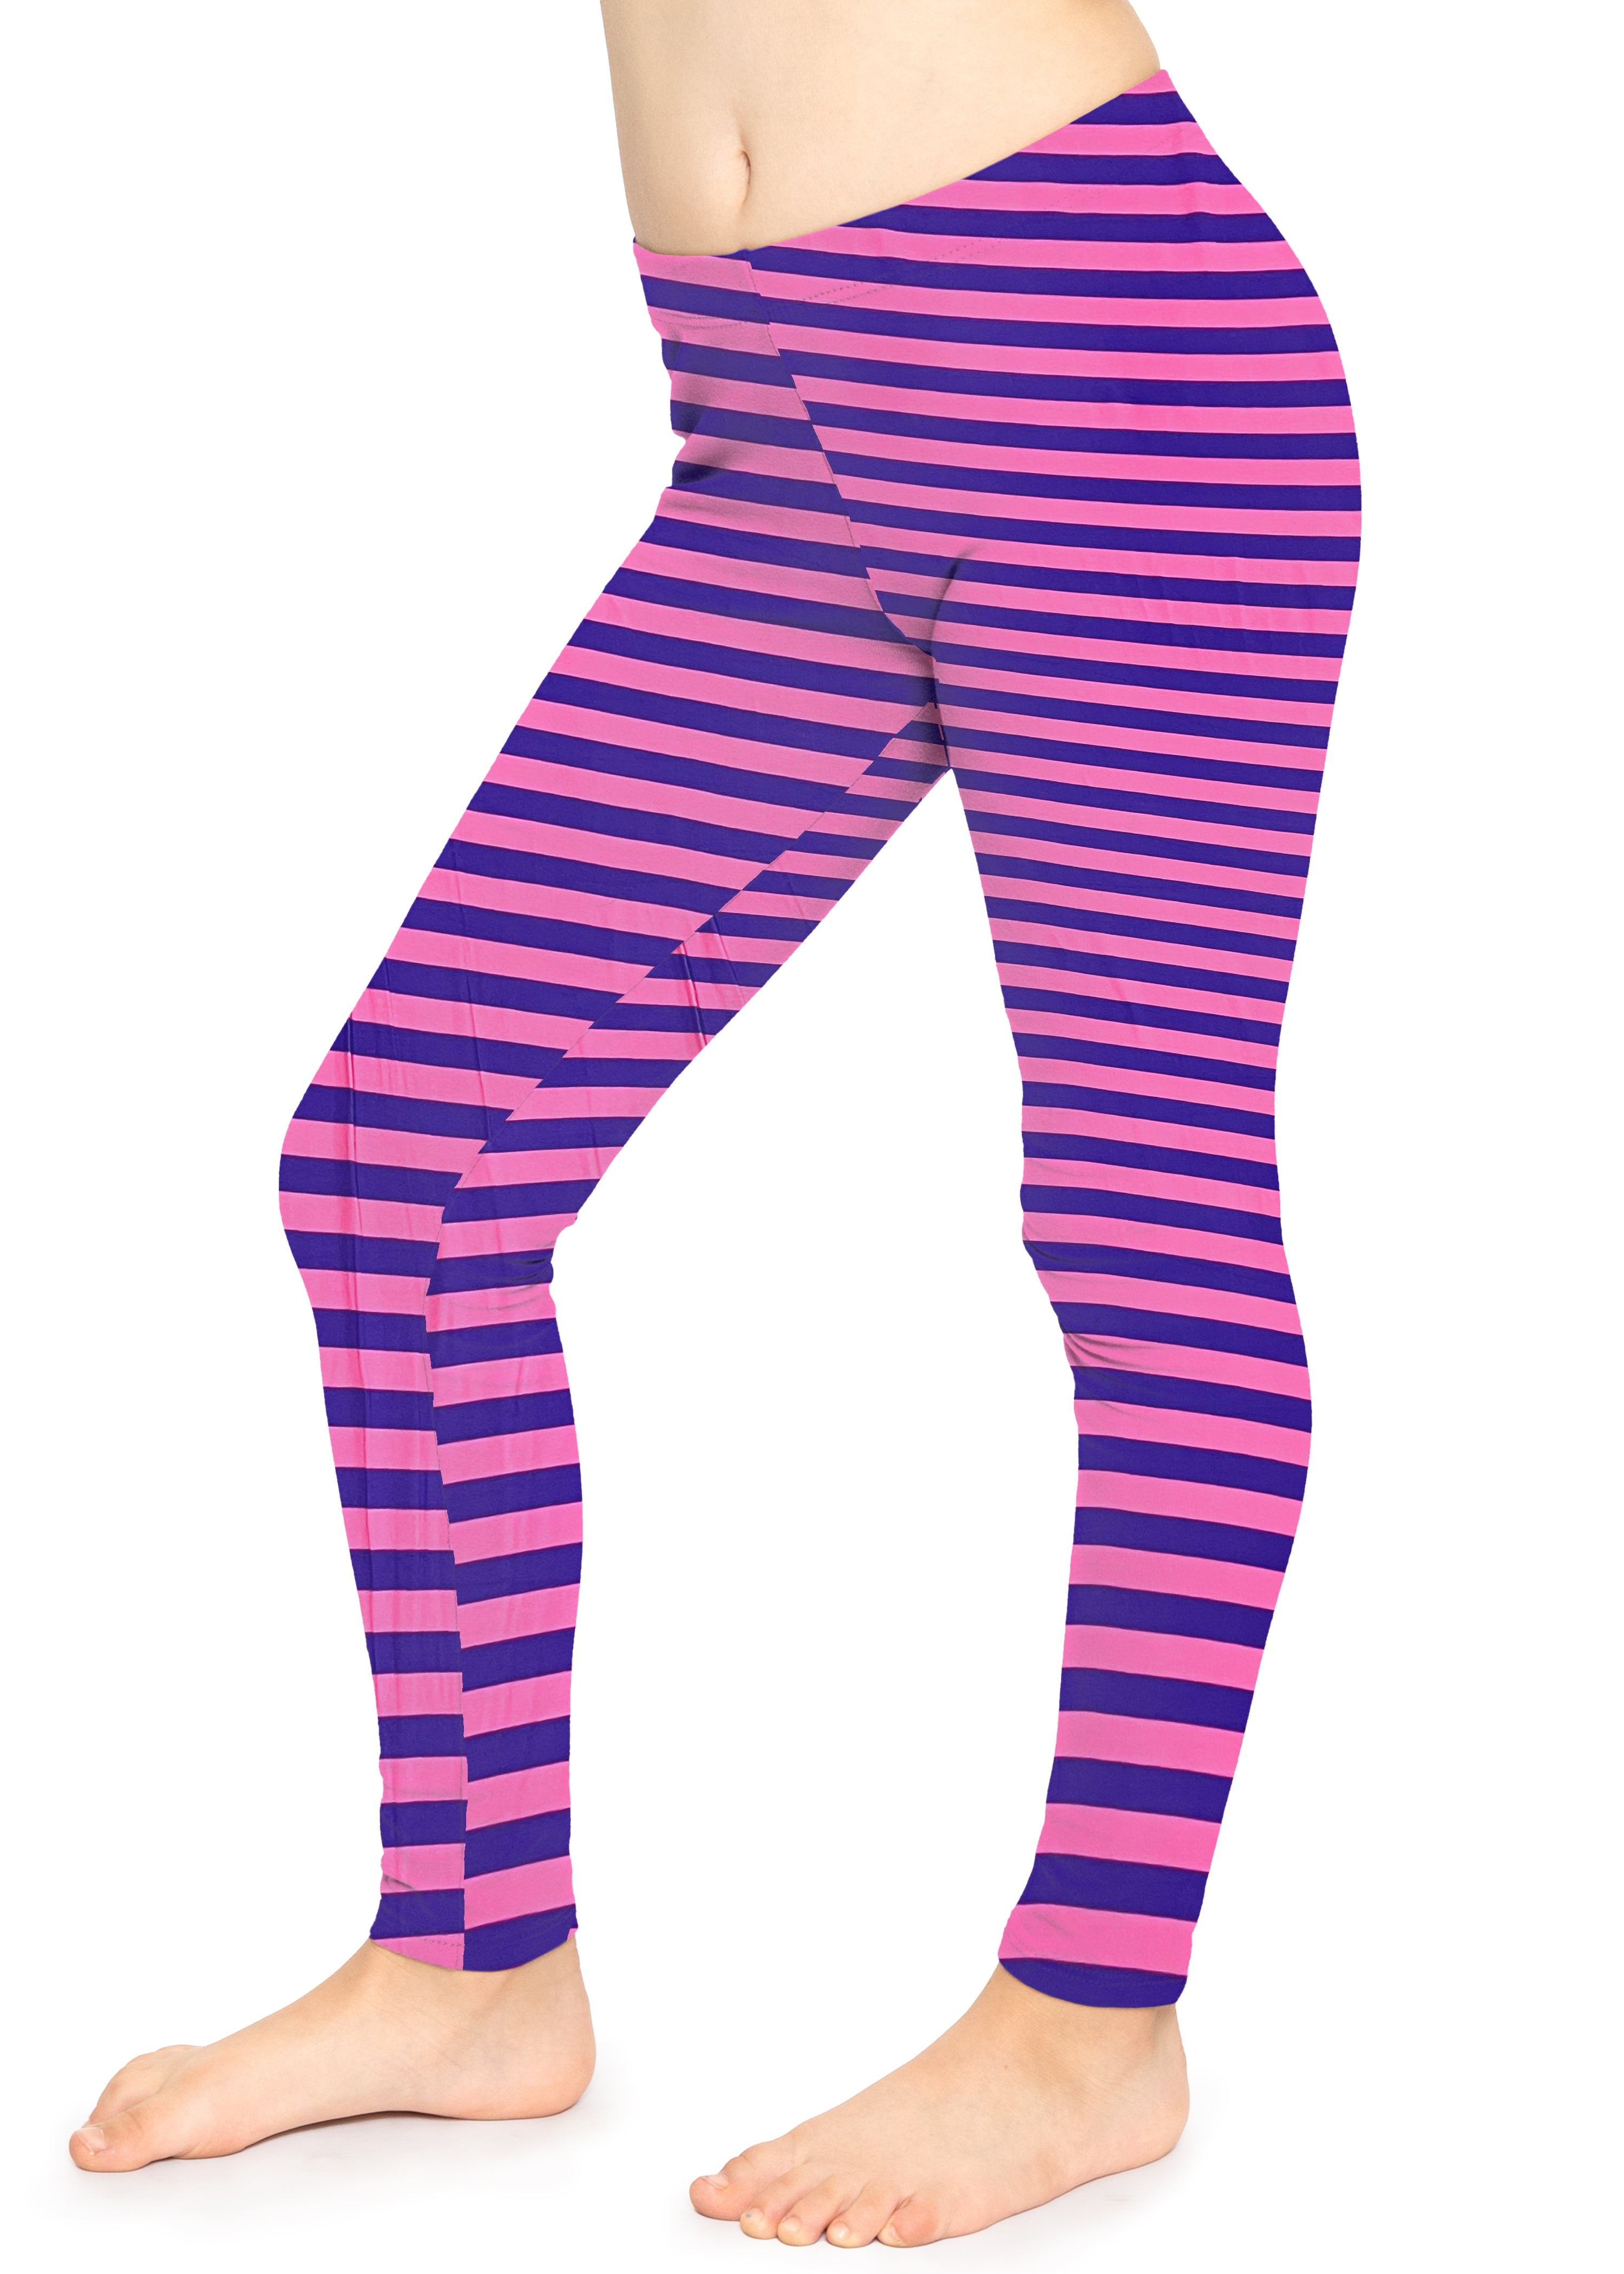 Stretch Is Comfort Girl's Oh so Soft Print Leggings | Child Size 4 - 14 ...